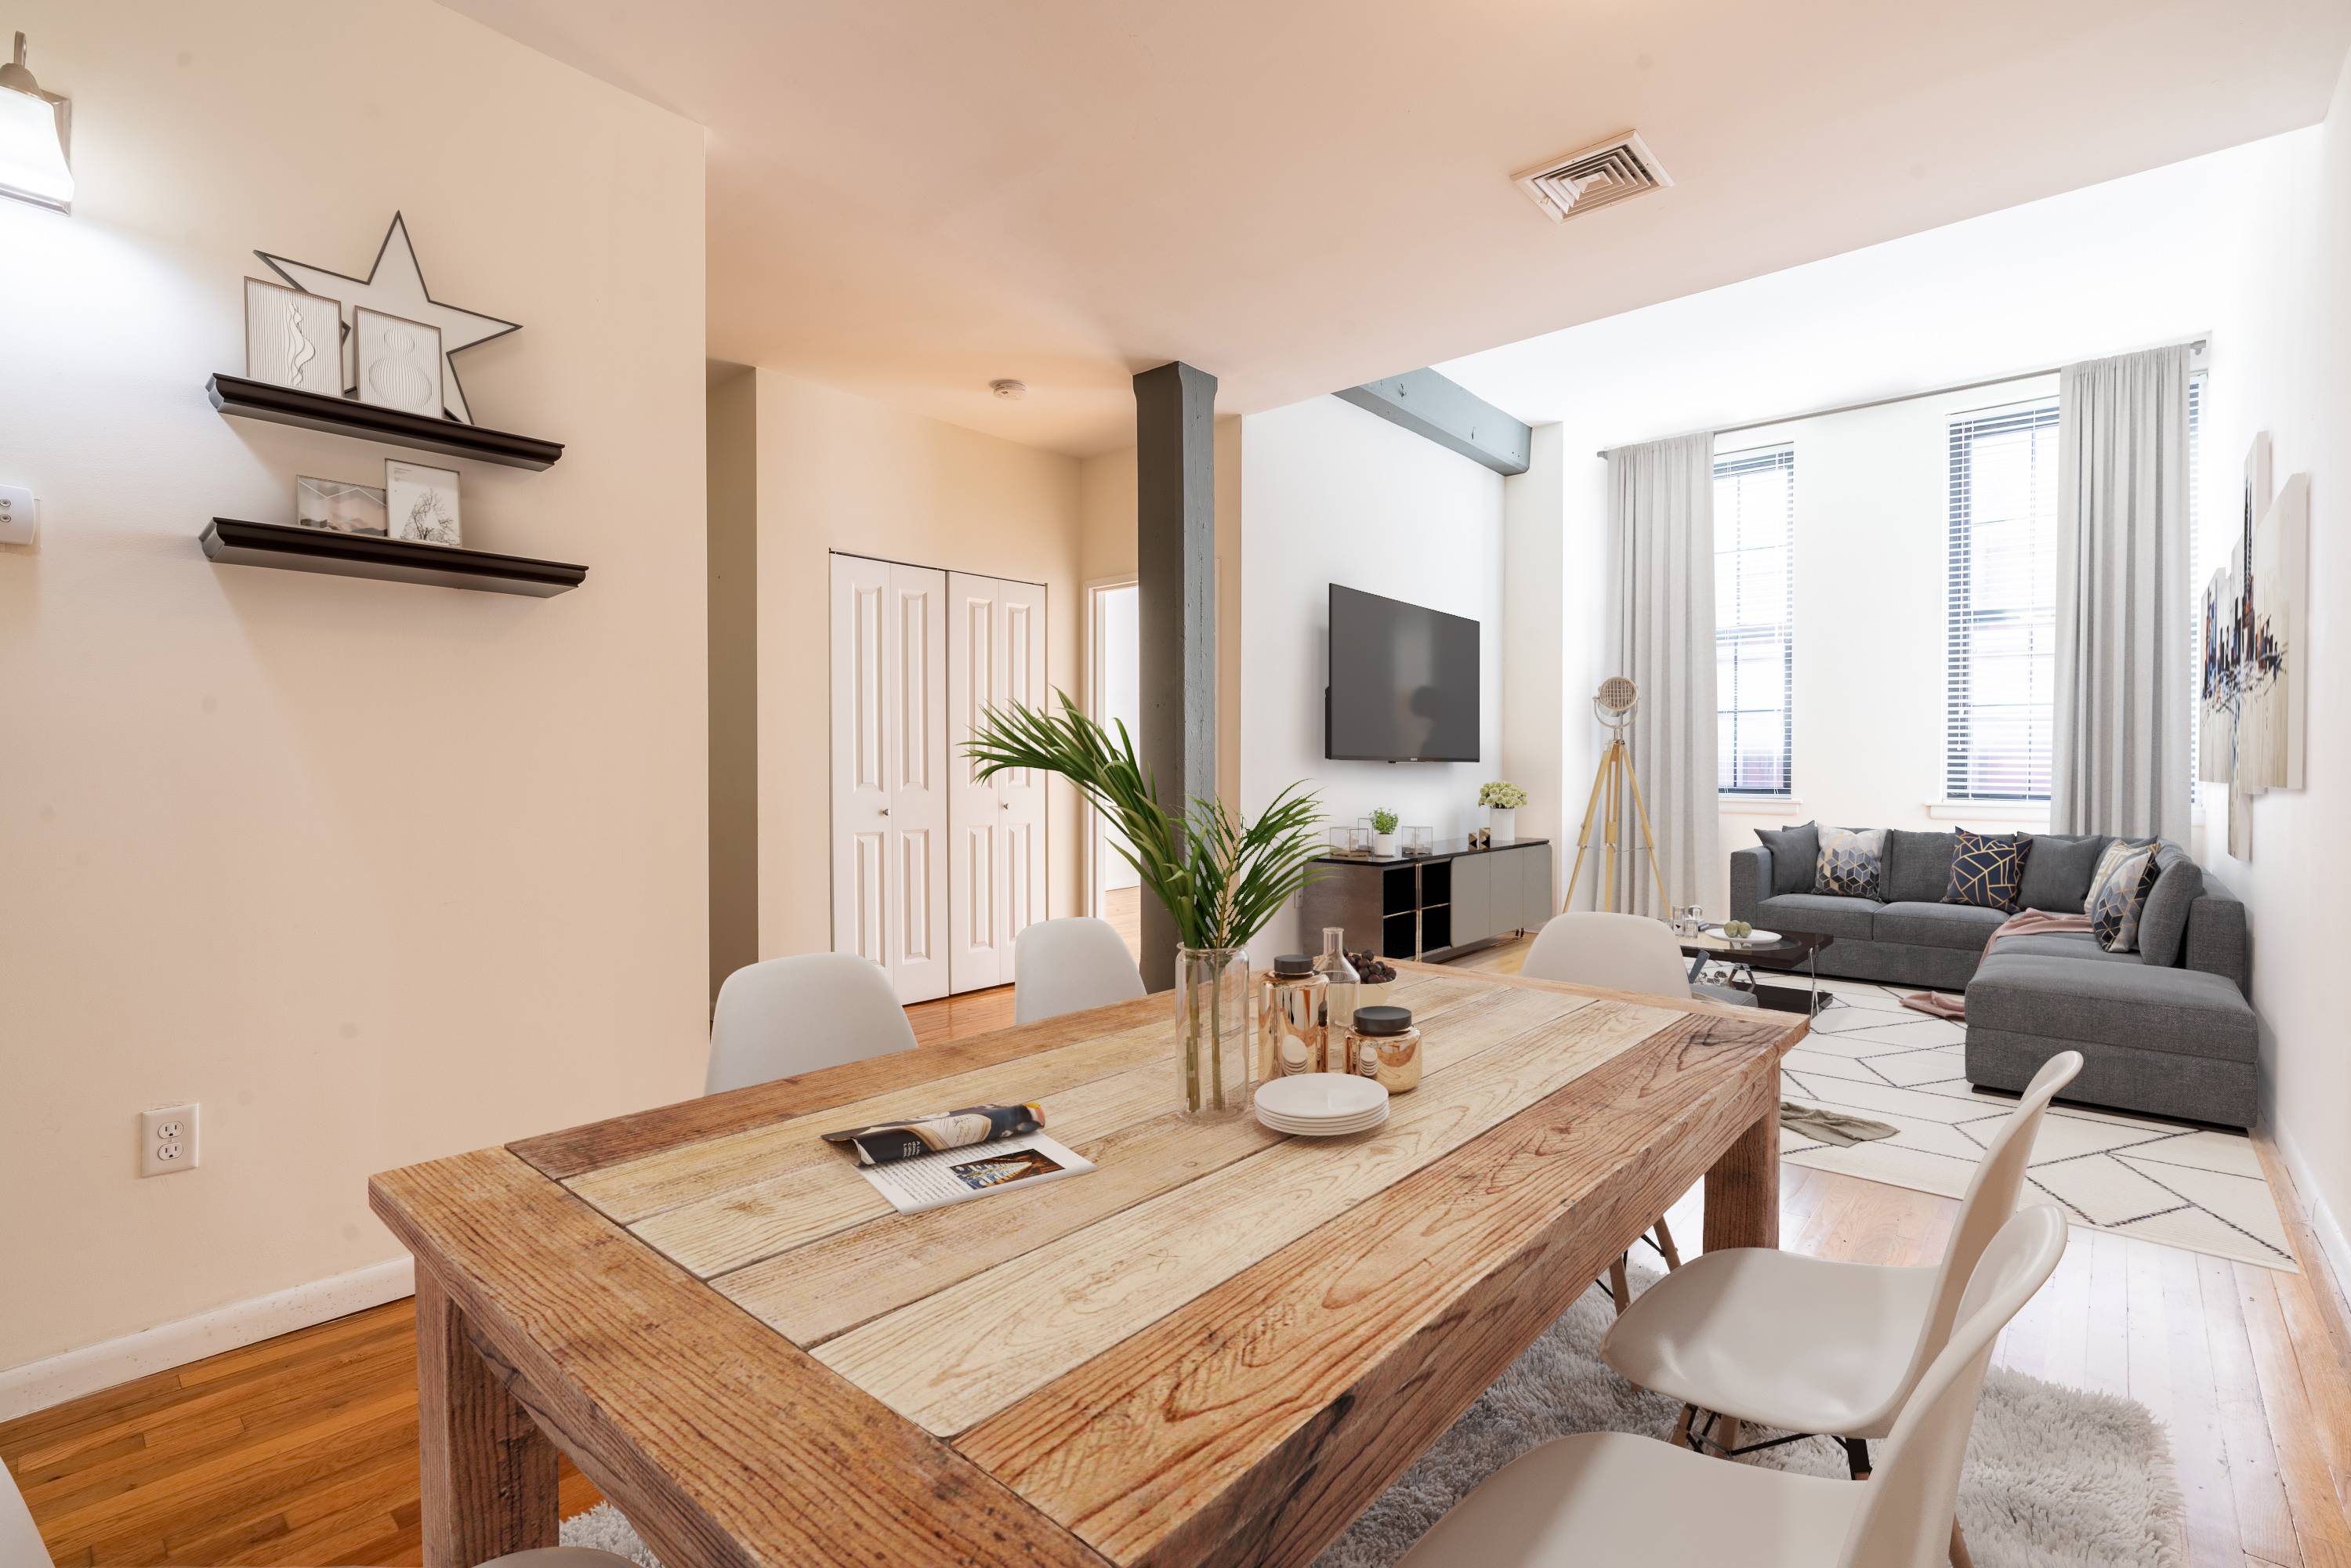 Stunning Open 1BR Apartment located at the Grand Adams Apartments in Downtown Hoboken NJ!  Soho-Style Lofts located in the heart of Downtown Hoboken! Studio - 3 Bedroom Homes! No Broker Fees.